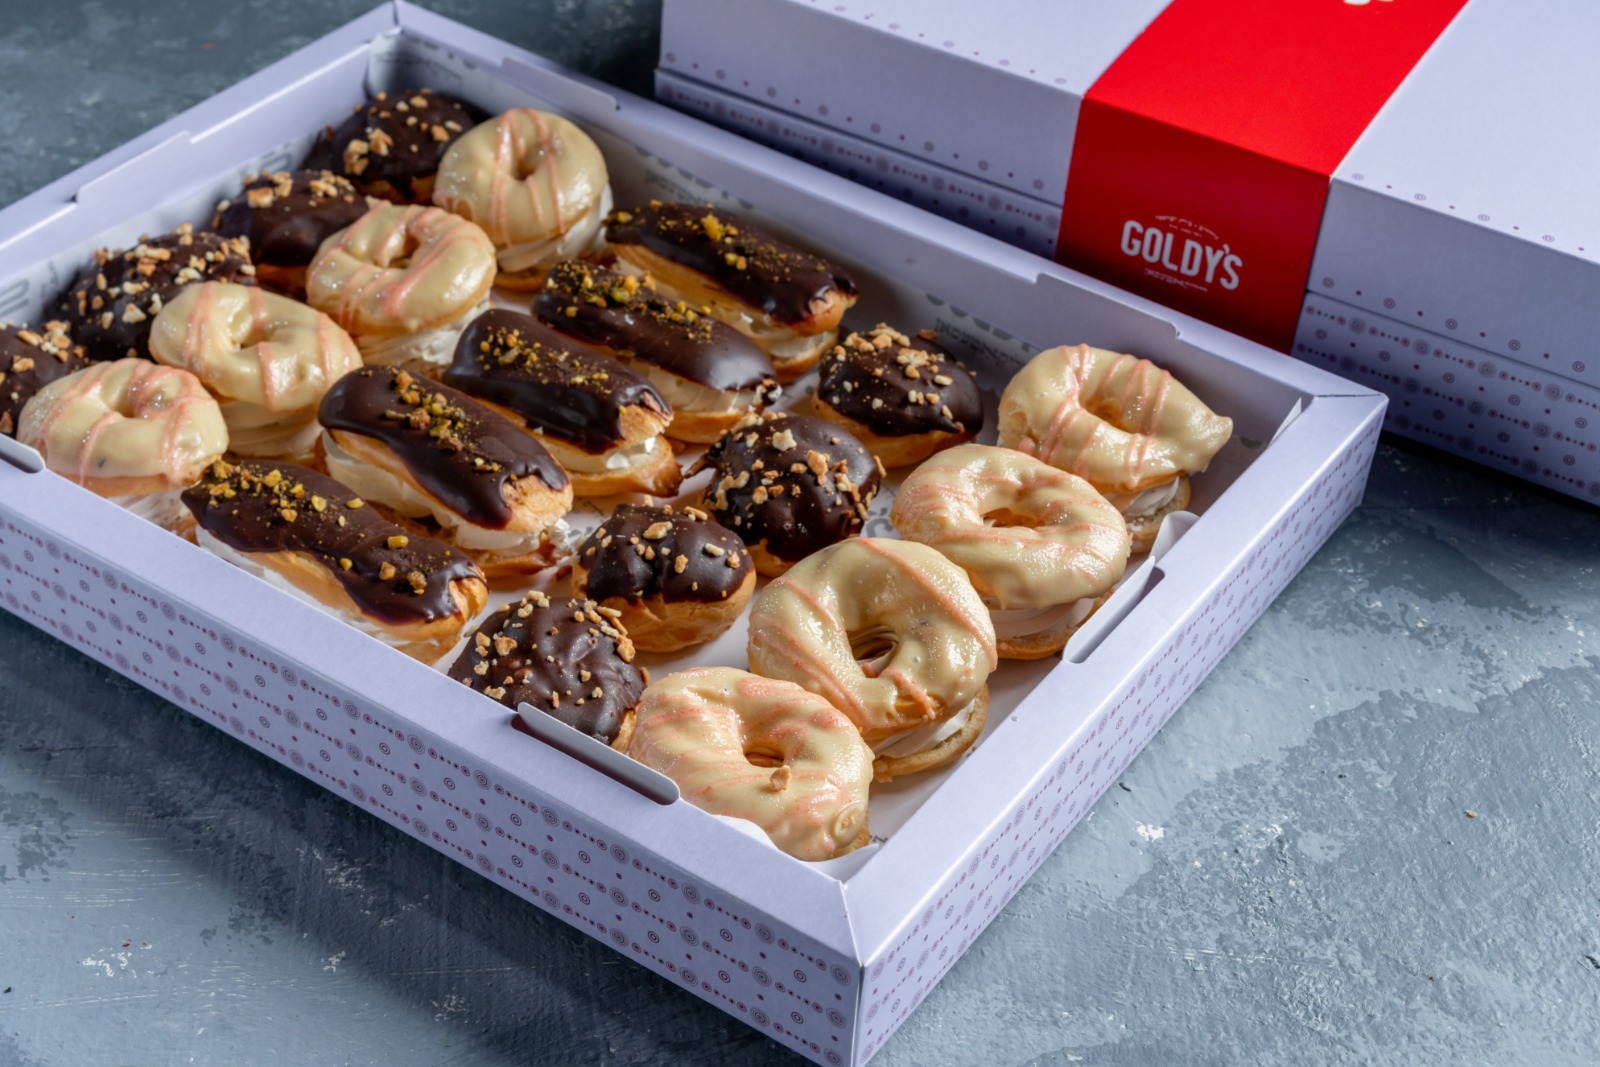 A mixed tray of eclairs and puffs